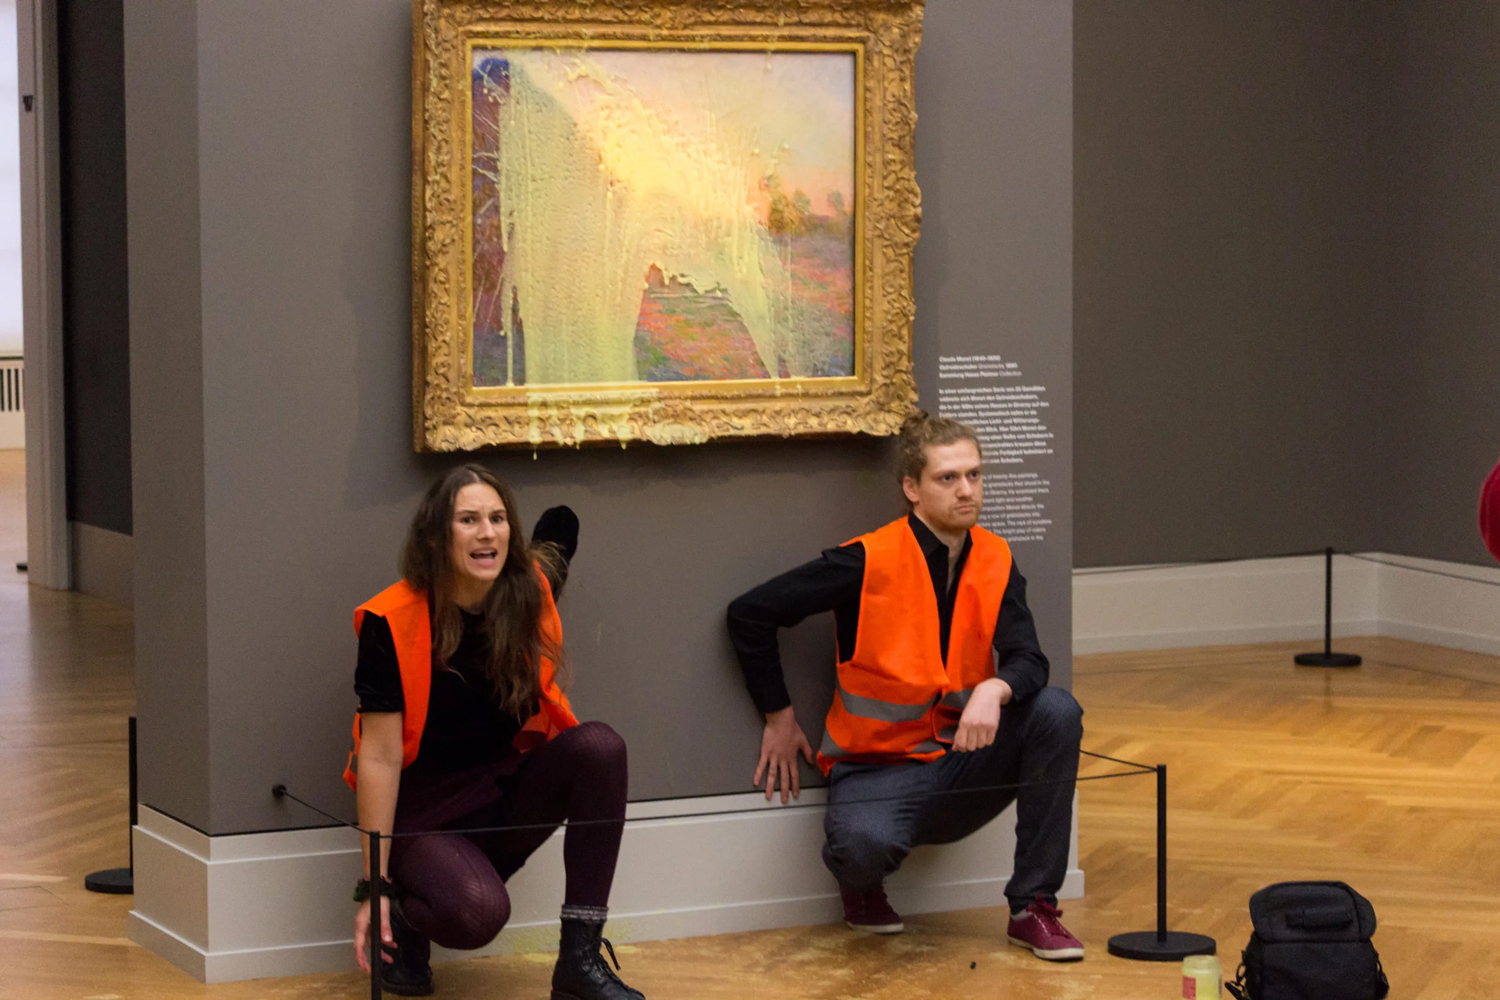 Climate Activists Throw Mashed Potatoes at $110 M. Monet Painting in Germany